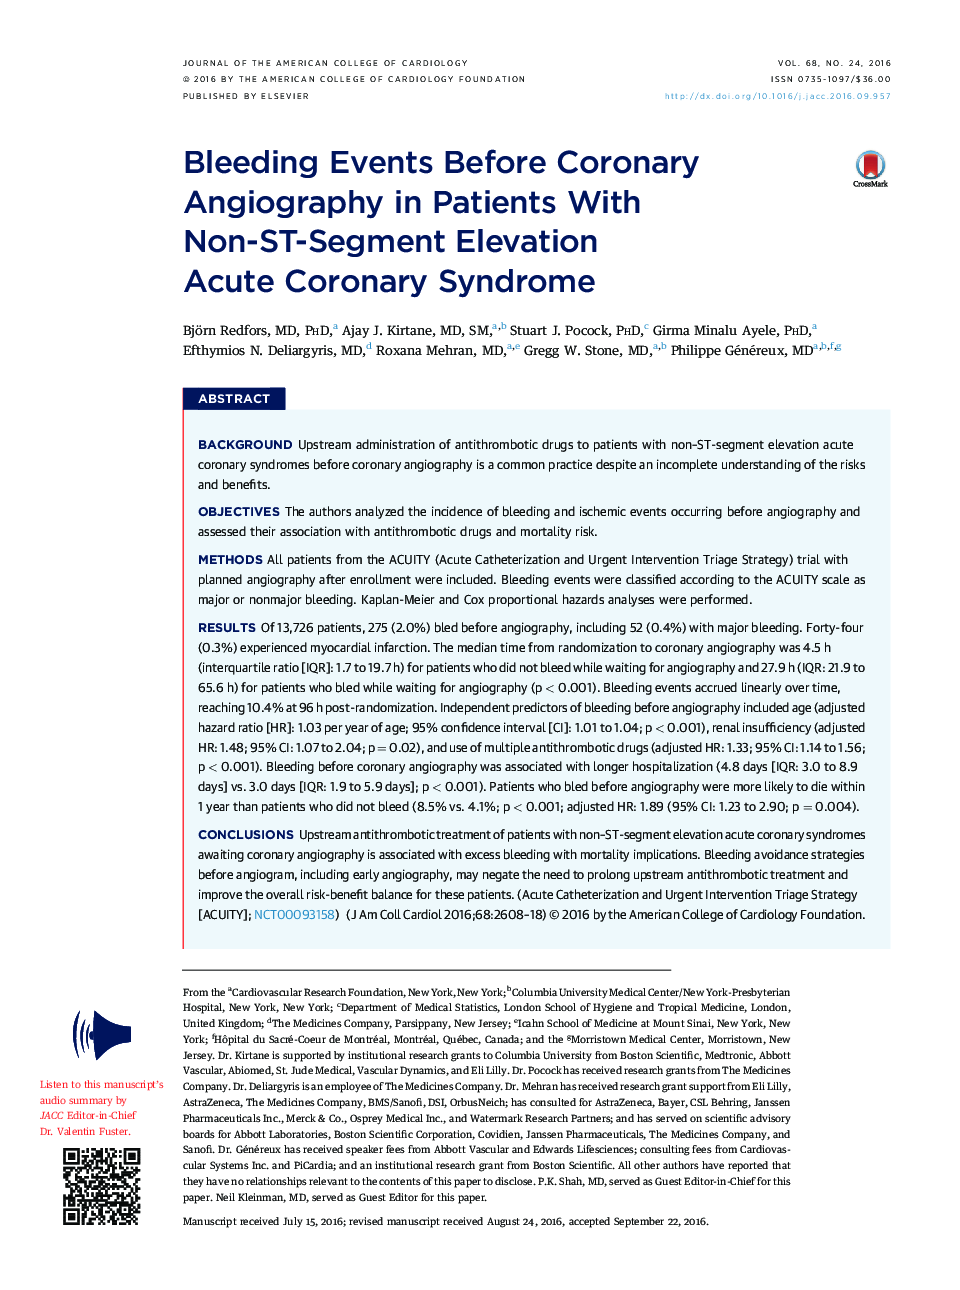 Bleeding Events Before Coronary Angiography in Patients With Non-ST-Segment Elevation AcuteÂ Coronary Syndrome